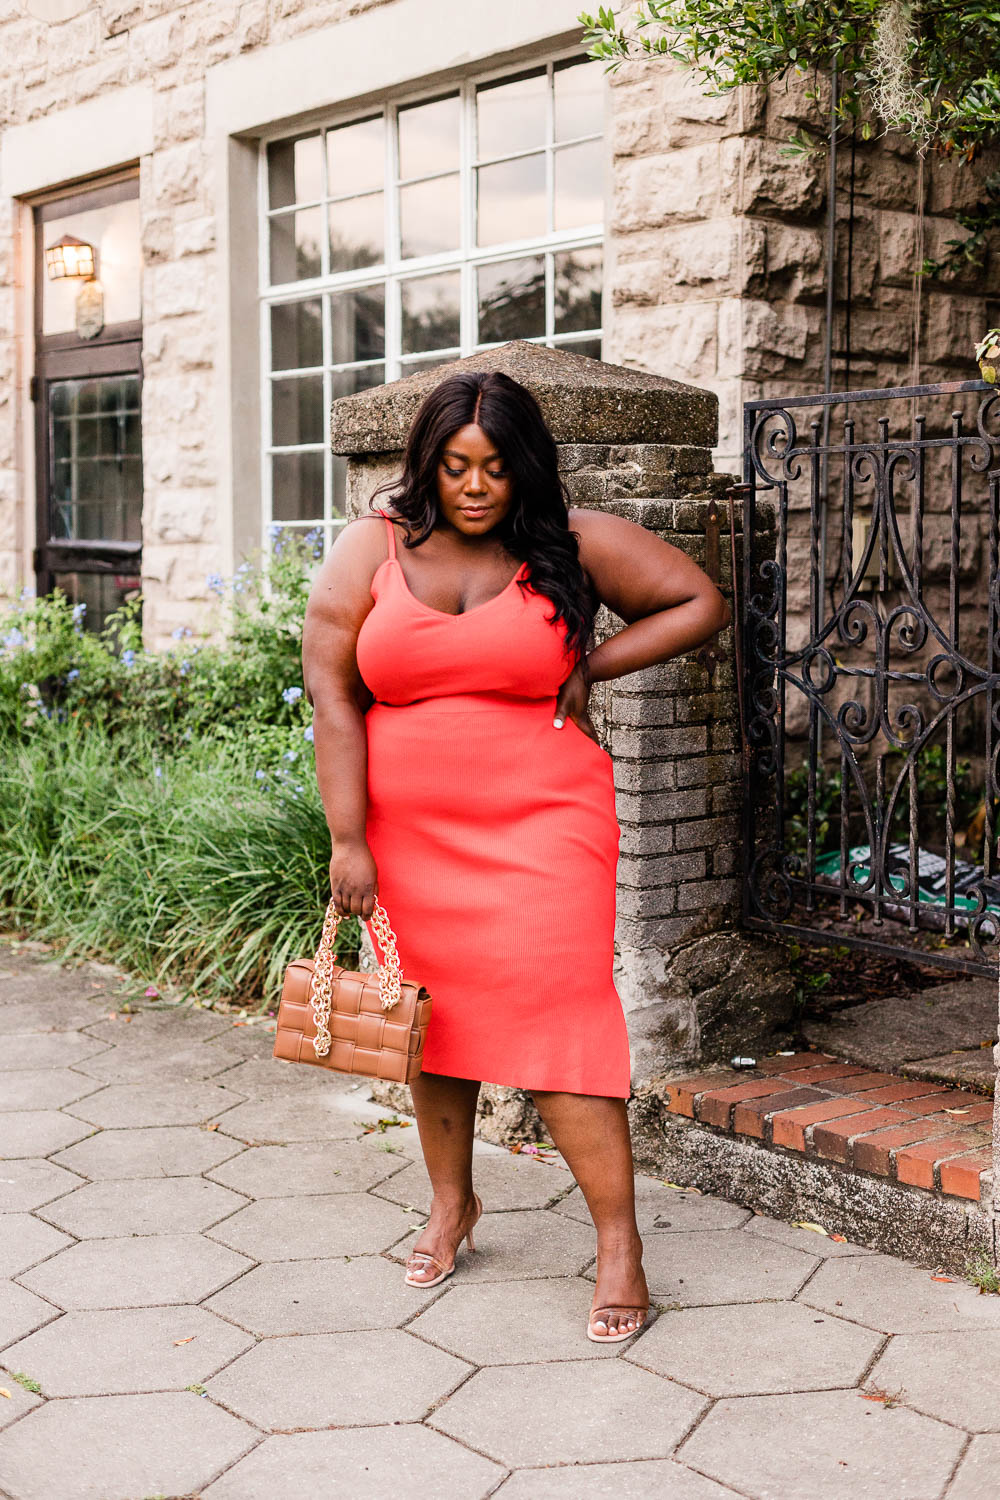 Amazon The Drop, Plus Size Fashion, Amazon The Drop Plus Size Skirt, Amazon the Drop Plus Size Cami, Plus Size Two Piece Set, Black Plus Size Model in Red Dress, Red Two Piece Outfit, Red Outfit Ideas, Bottega Veneta Dupe, Steve Madden Loft Sandals, Summer Fashion Ideas, Plus Size Summer Fashion Outfit Ideas